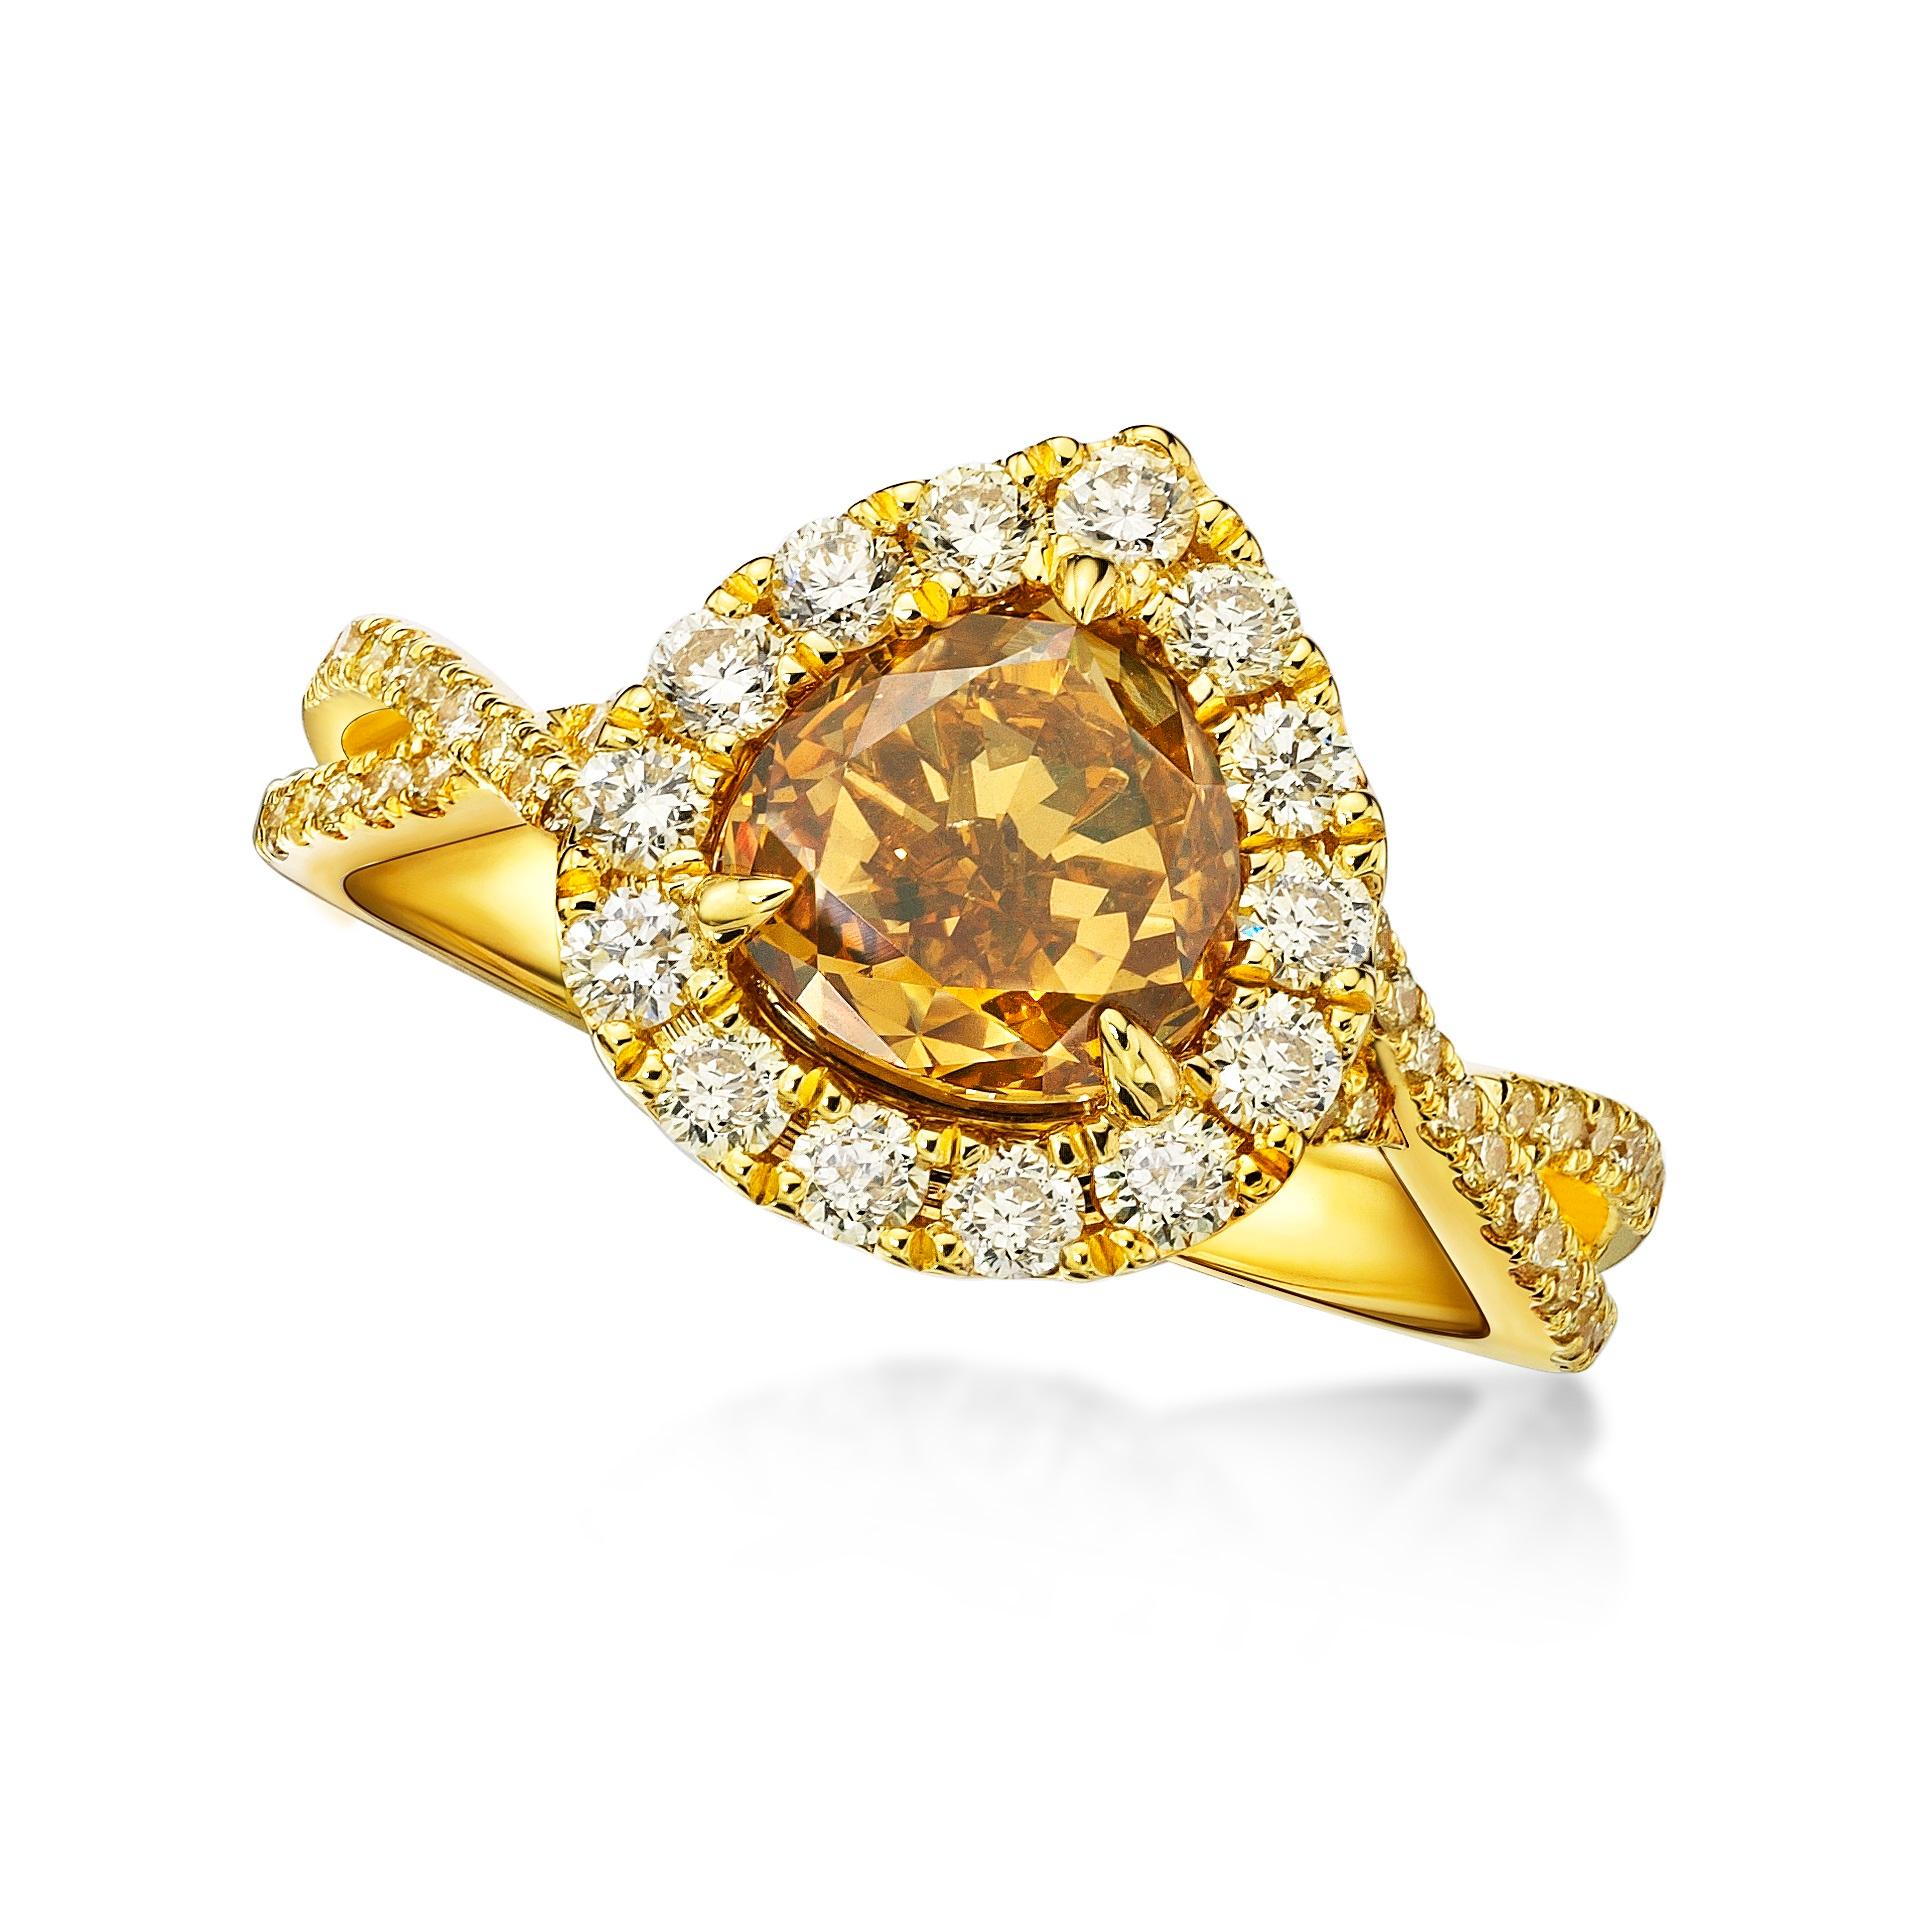 Featuring a  1.74 carat modified heart shape Fancy Deep brownish yellow Diamond Ring  , with yellow diamond halo. Finished in yellow  gold. 

Center stone certified by world wide known GIA institution. (7161398683) 

Ring size- US 6.5,  Kahn also